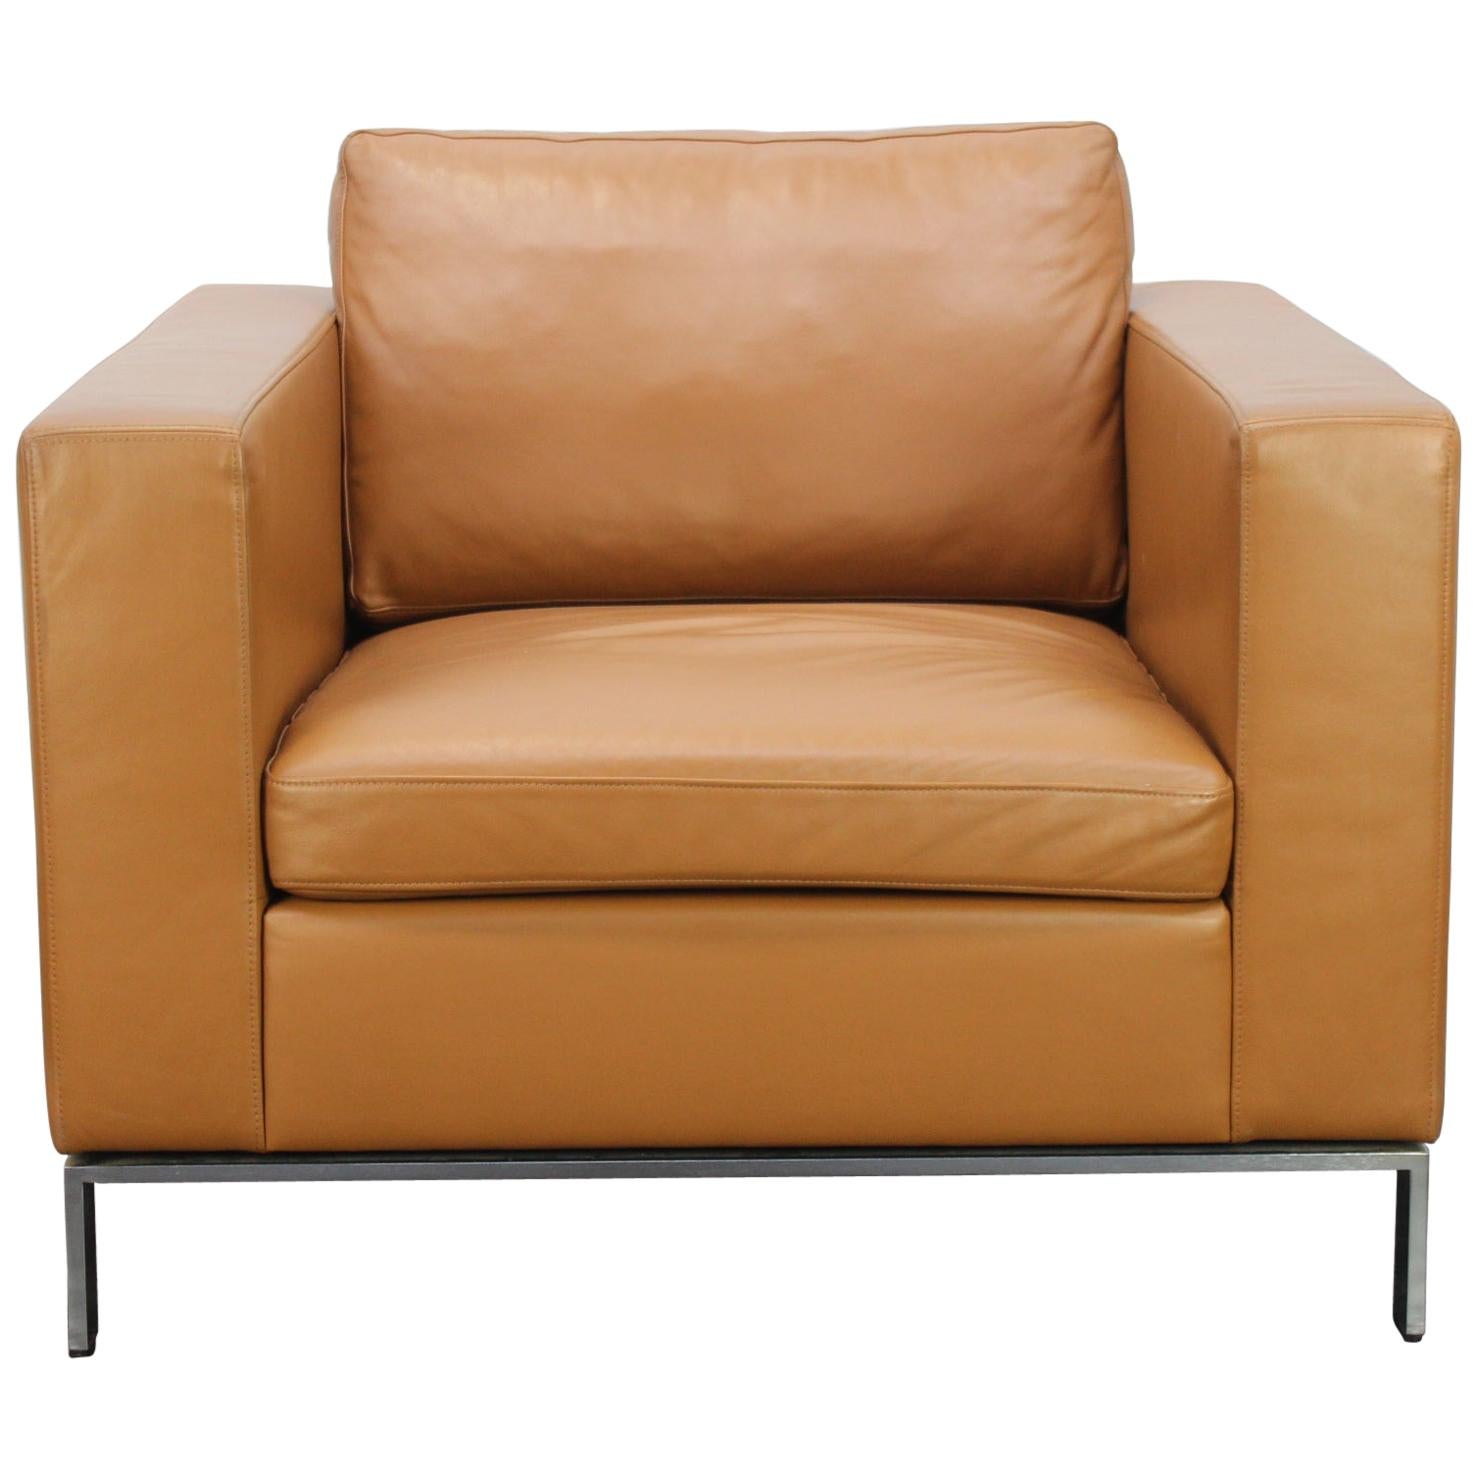 Walter Knoll "Foster 503.10" Armchair in Tan-Brown Leather by Sir Norman Foster